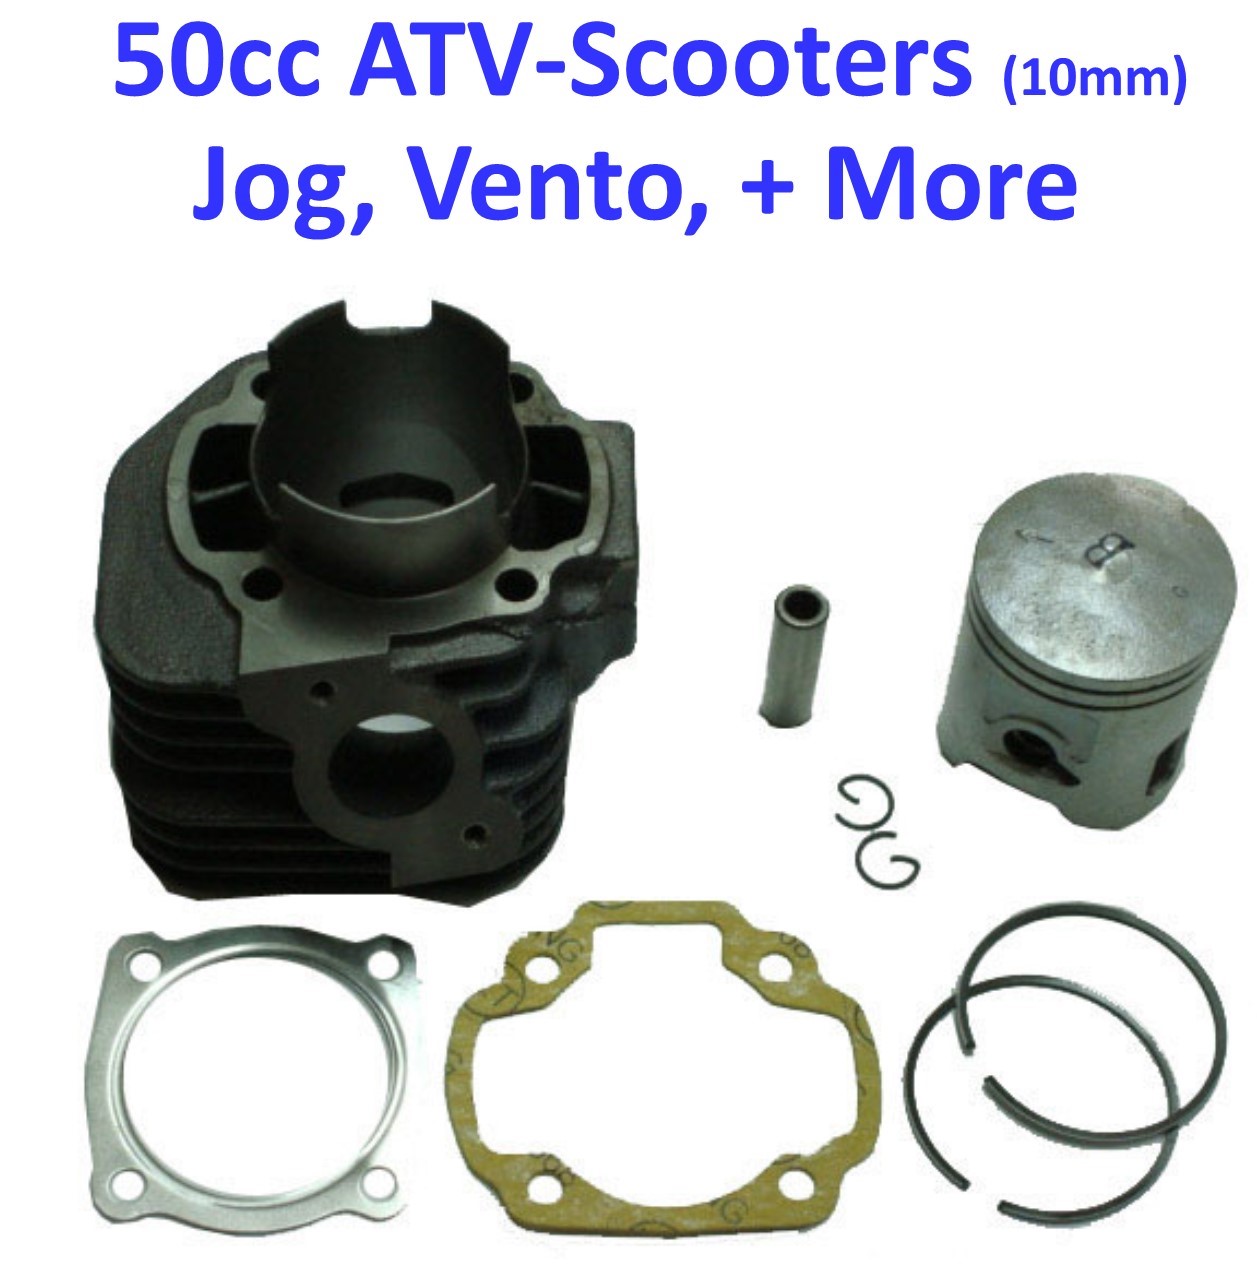 Cylinder Piston Top End Kit 49cc 2 Stroke ATVs, Scooters B=40mm Pin=10mm H=64mm Baccio, Benelli, Jog, QJ, Vento